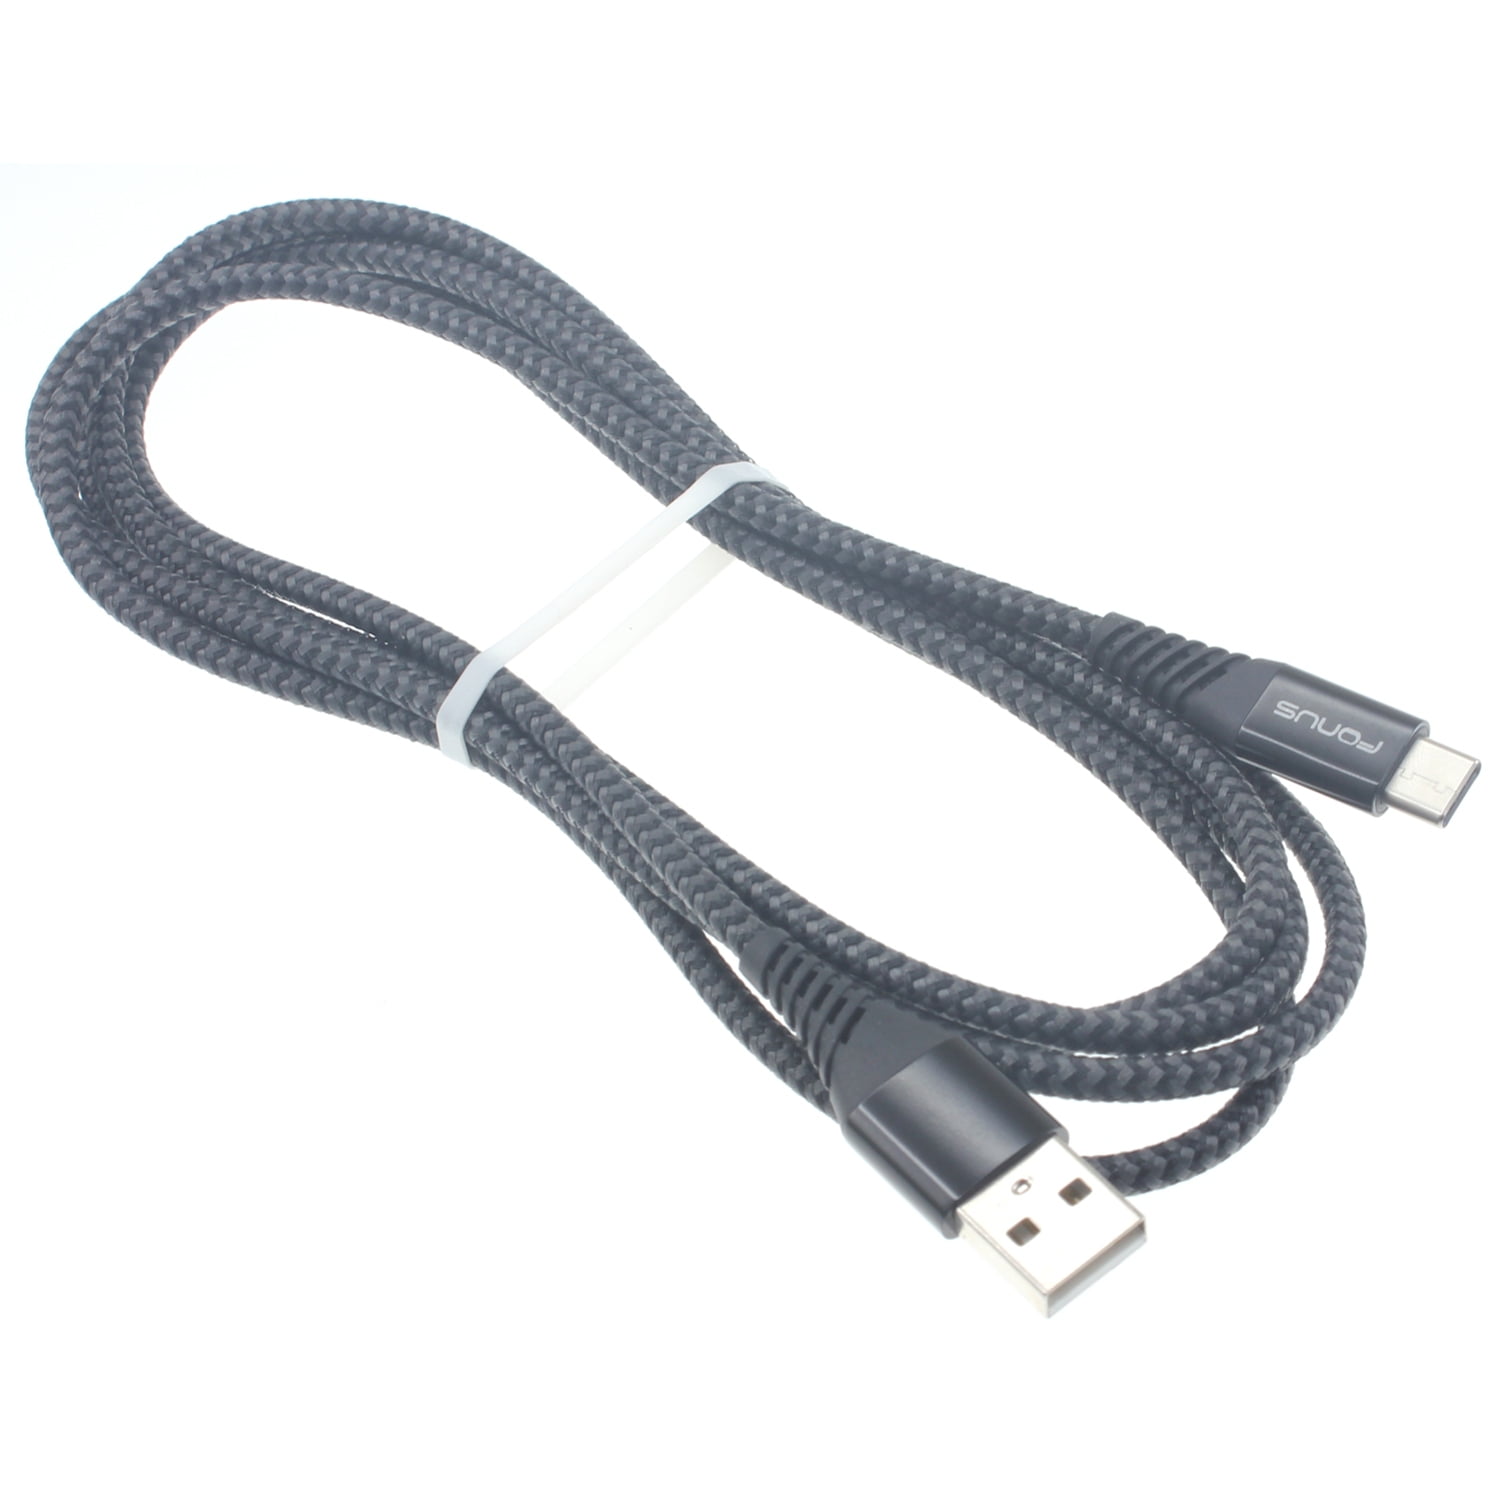 Doneioe Type-C Cable USB C Charging Cable Premium Chip Copper Core Anti-Interference Fast Charging Speed 